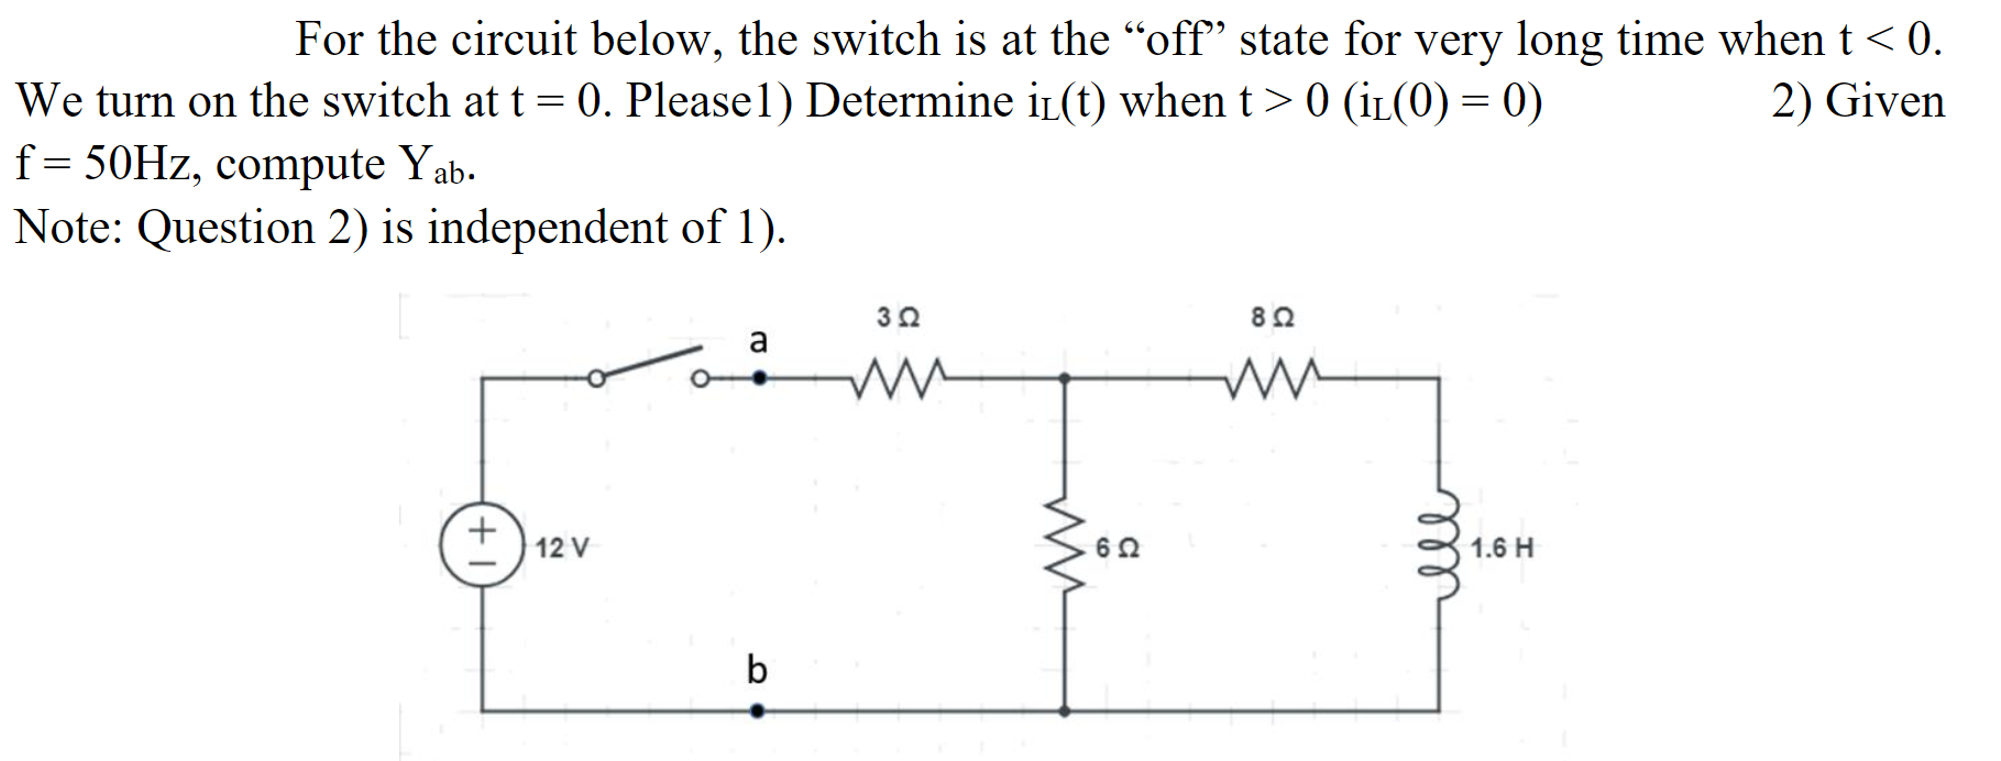 For the circuit below, the switch is at the "off° state for very long time whent<0.
We turn on the switch at t = 0. Please1) Determine iL(t) when t>0 (iL(0) = 0)
f= 50HZ, compute Yab.
Note: Question 2) is independent of 1).
2) Given
%3D
a
30
80
12 V
1.6 H
60
b
